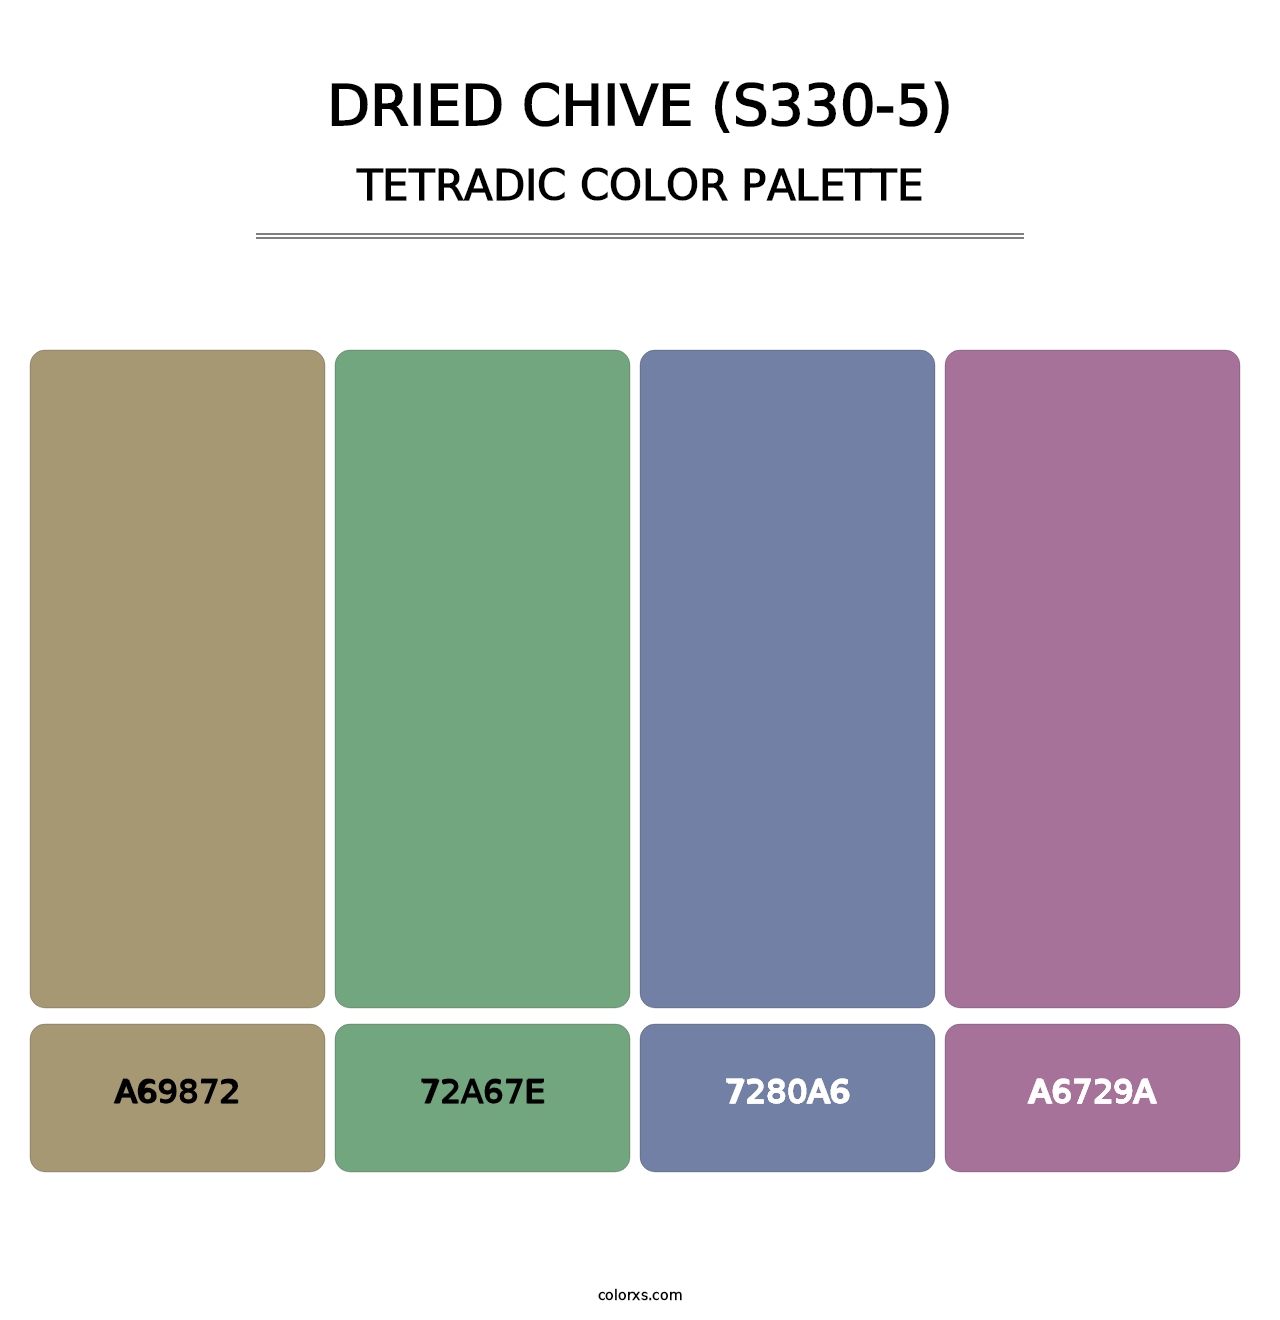 Dried Chive (S330-5) - Tetradic Color Palette